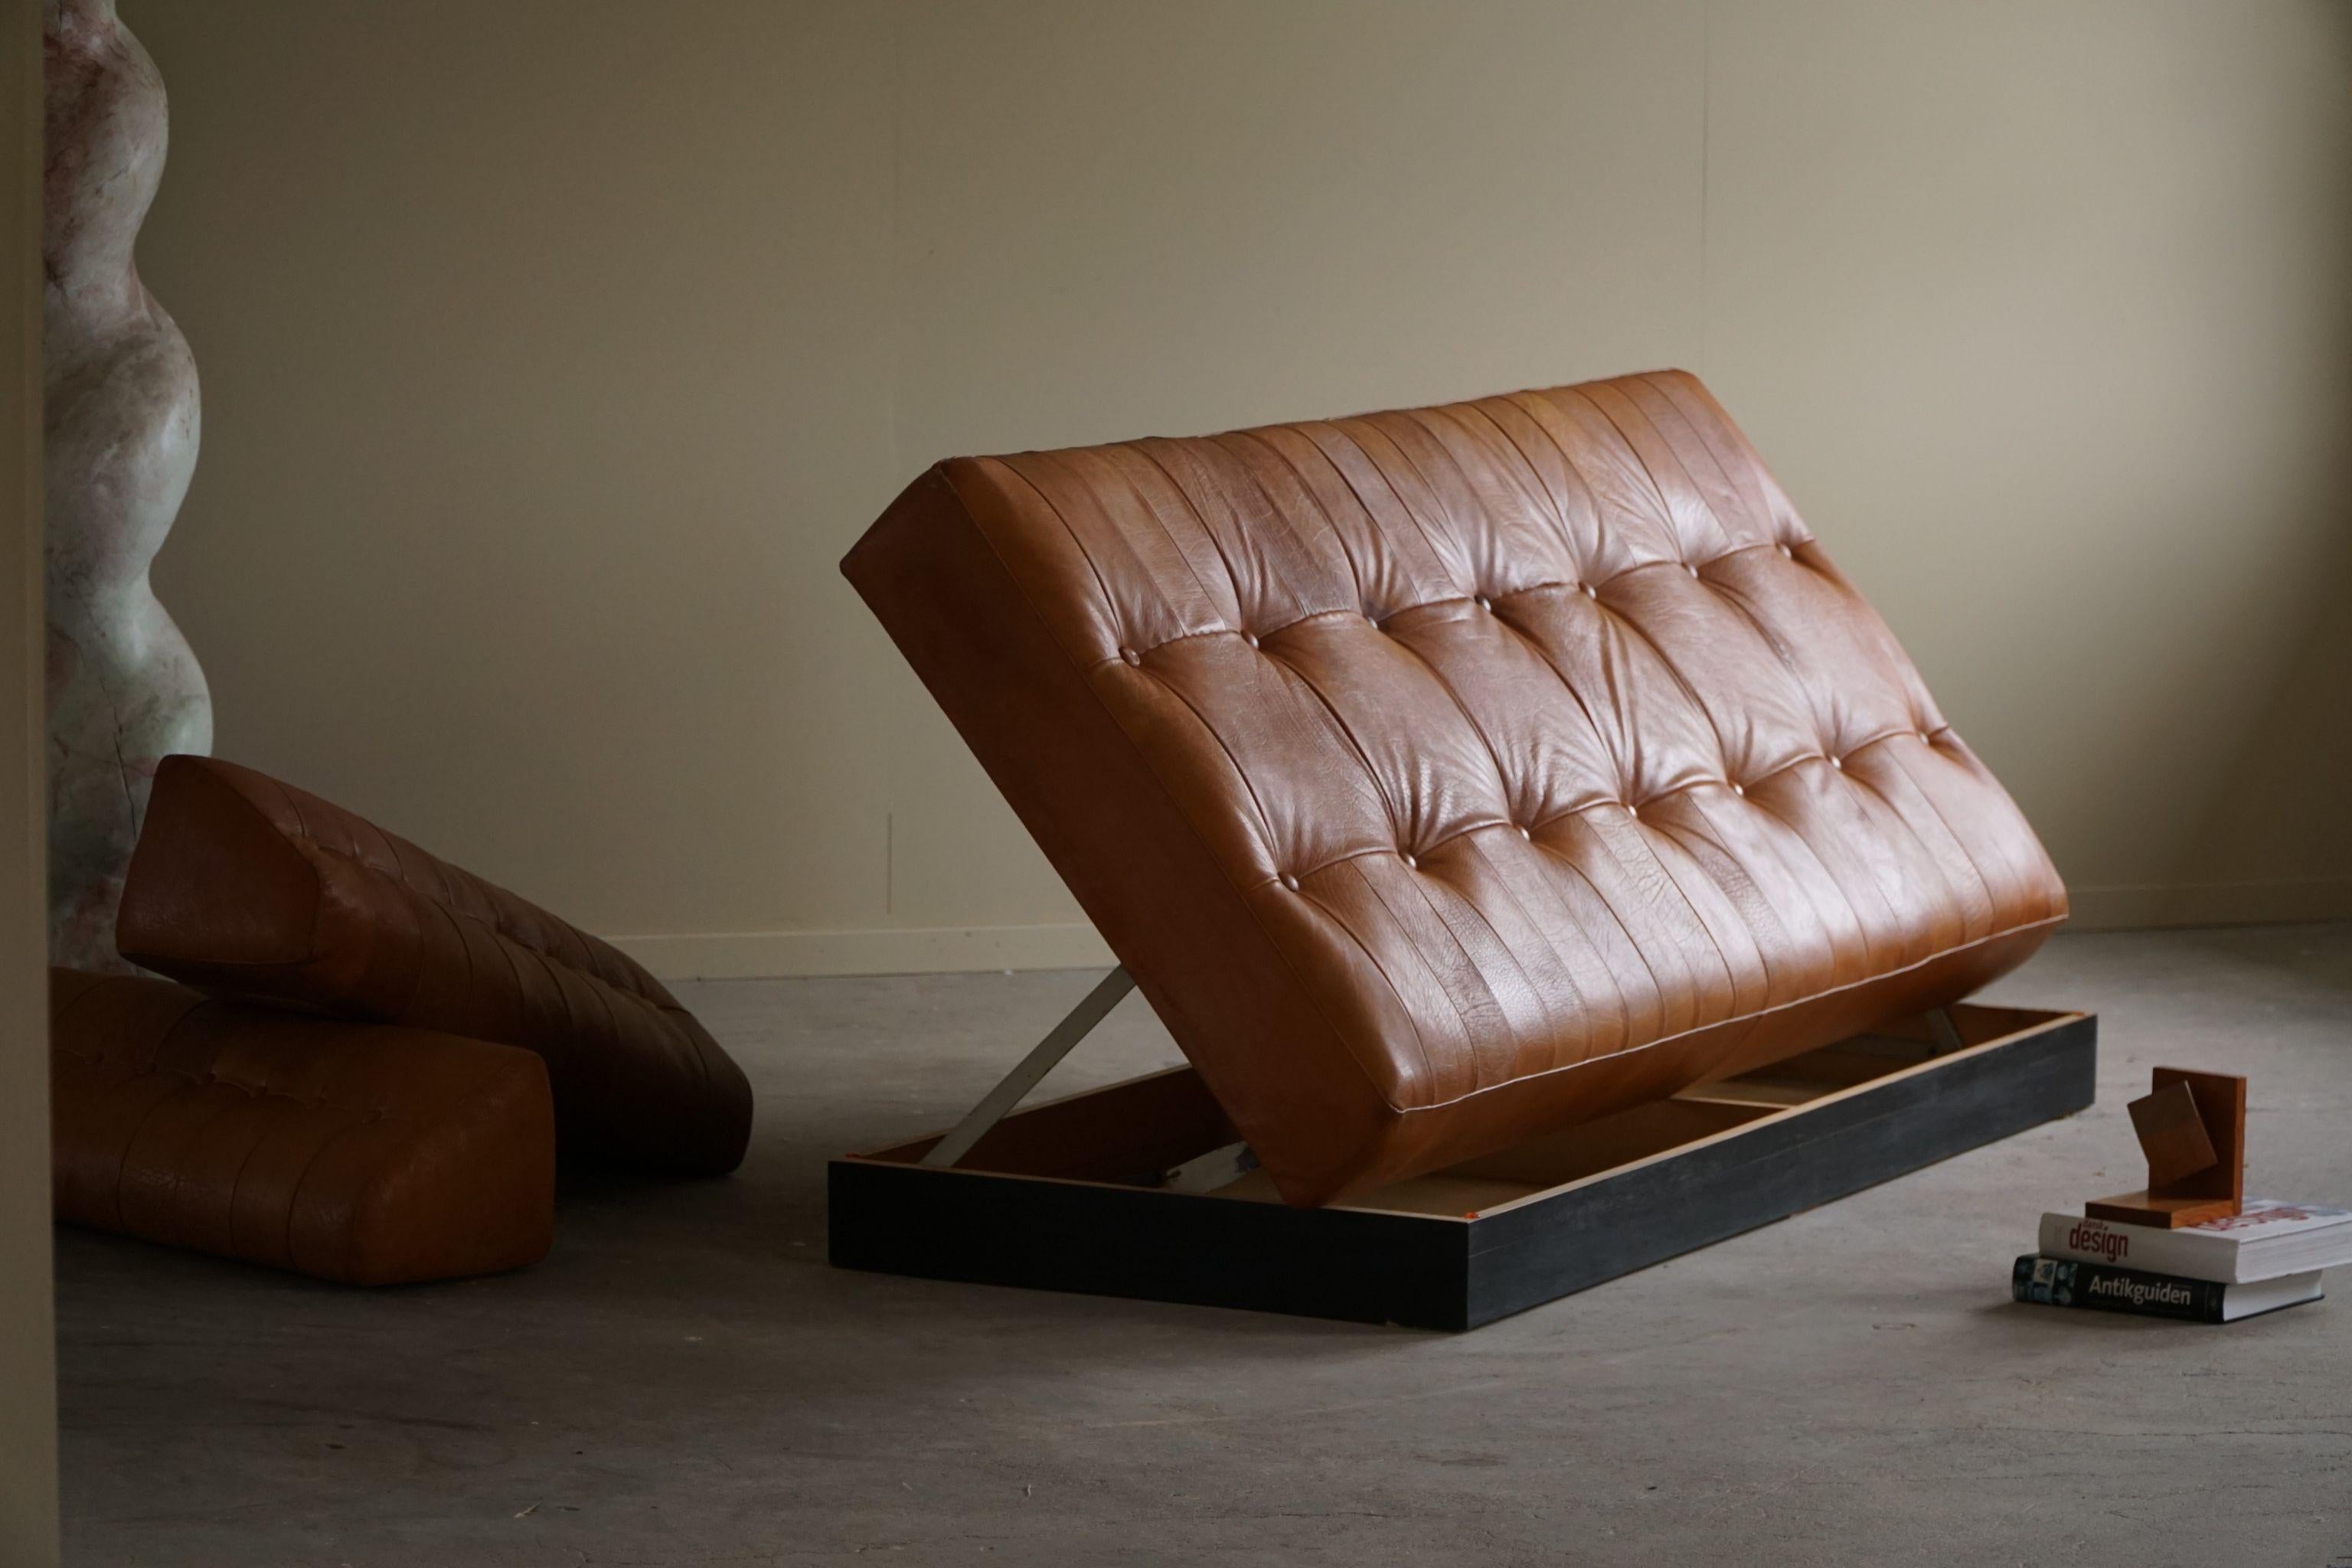 20th Century Danish Mid-Century Modern Daybed/Sofa in Cognac Brown Leather, Made in 1960s